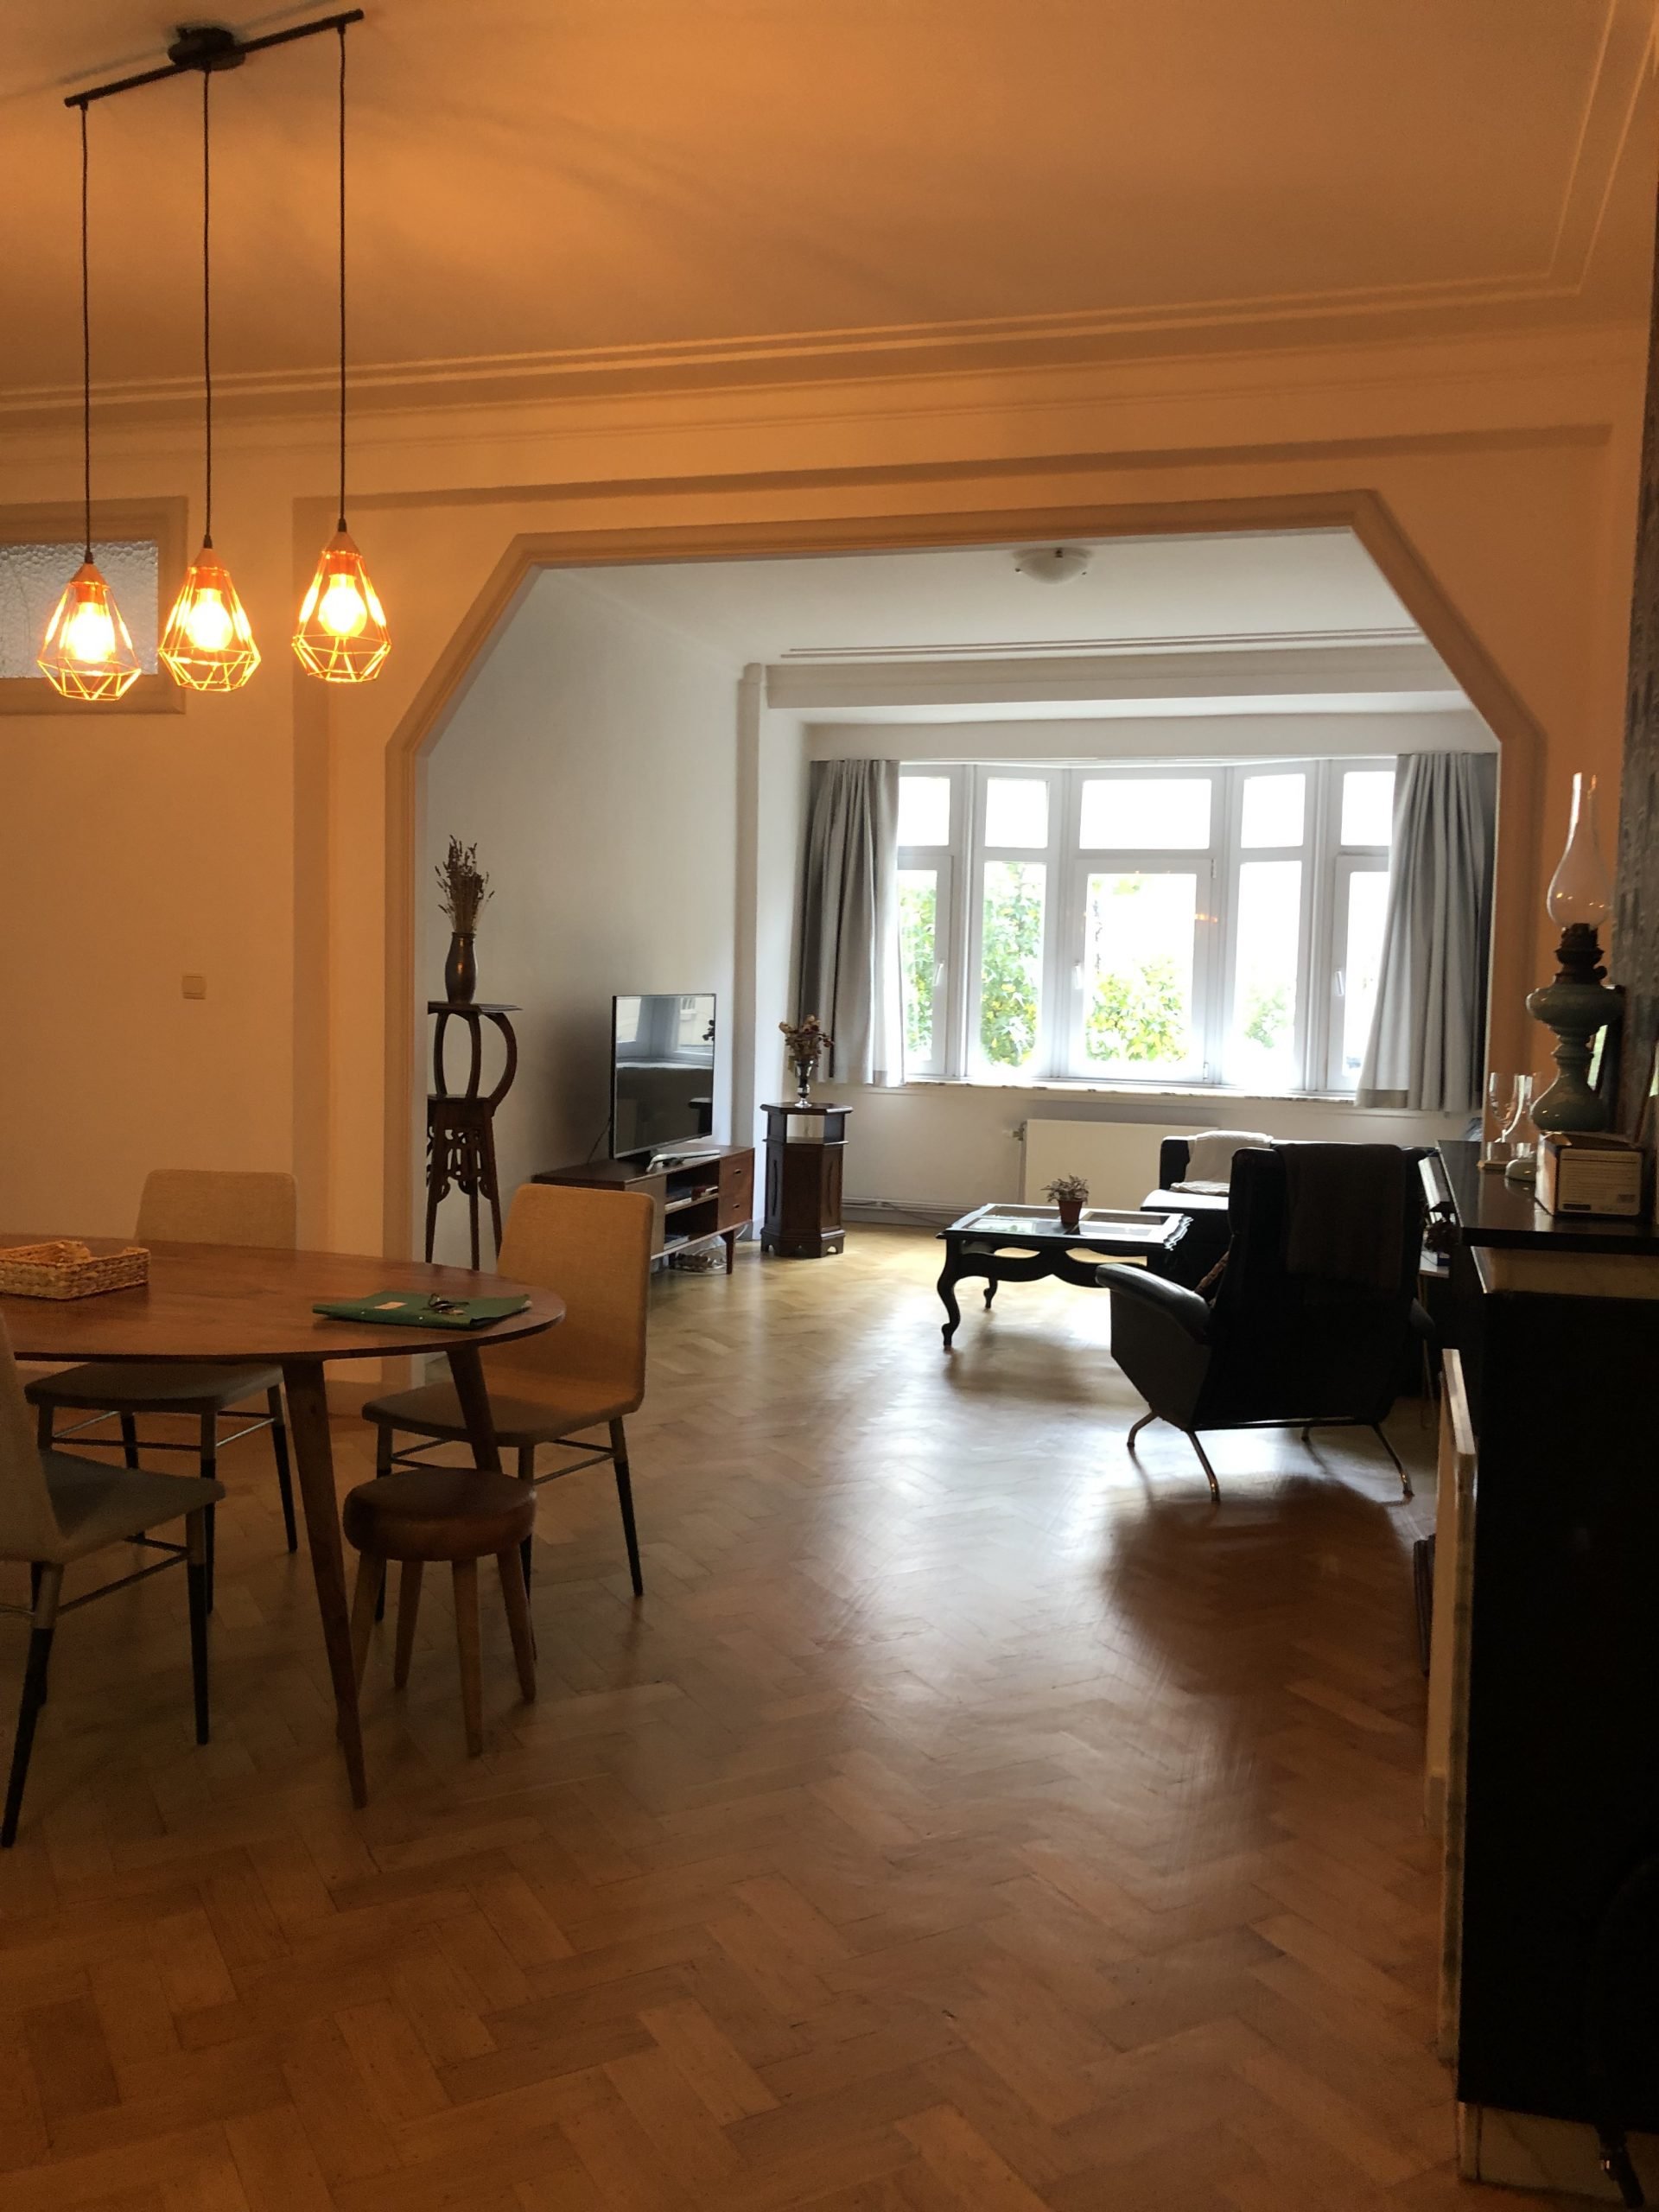 Meirbrug - Fully equipped apartment in Antwerp